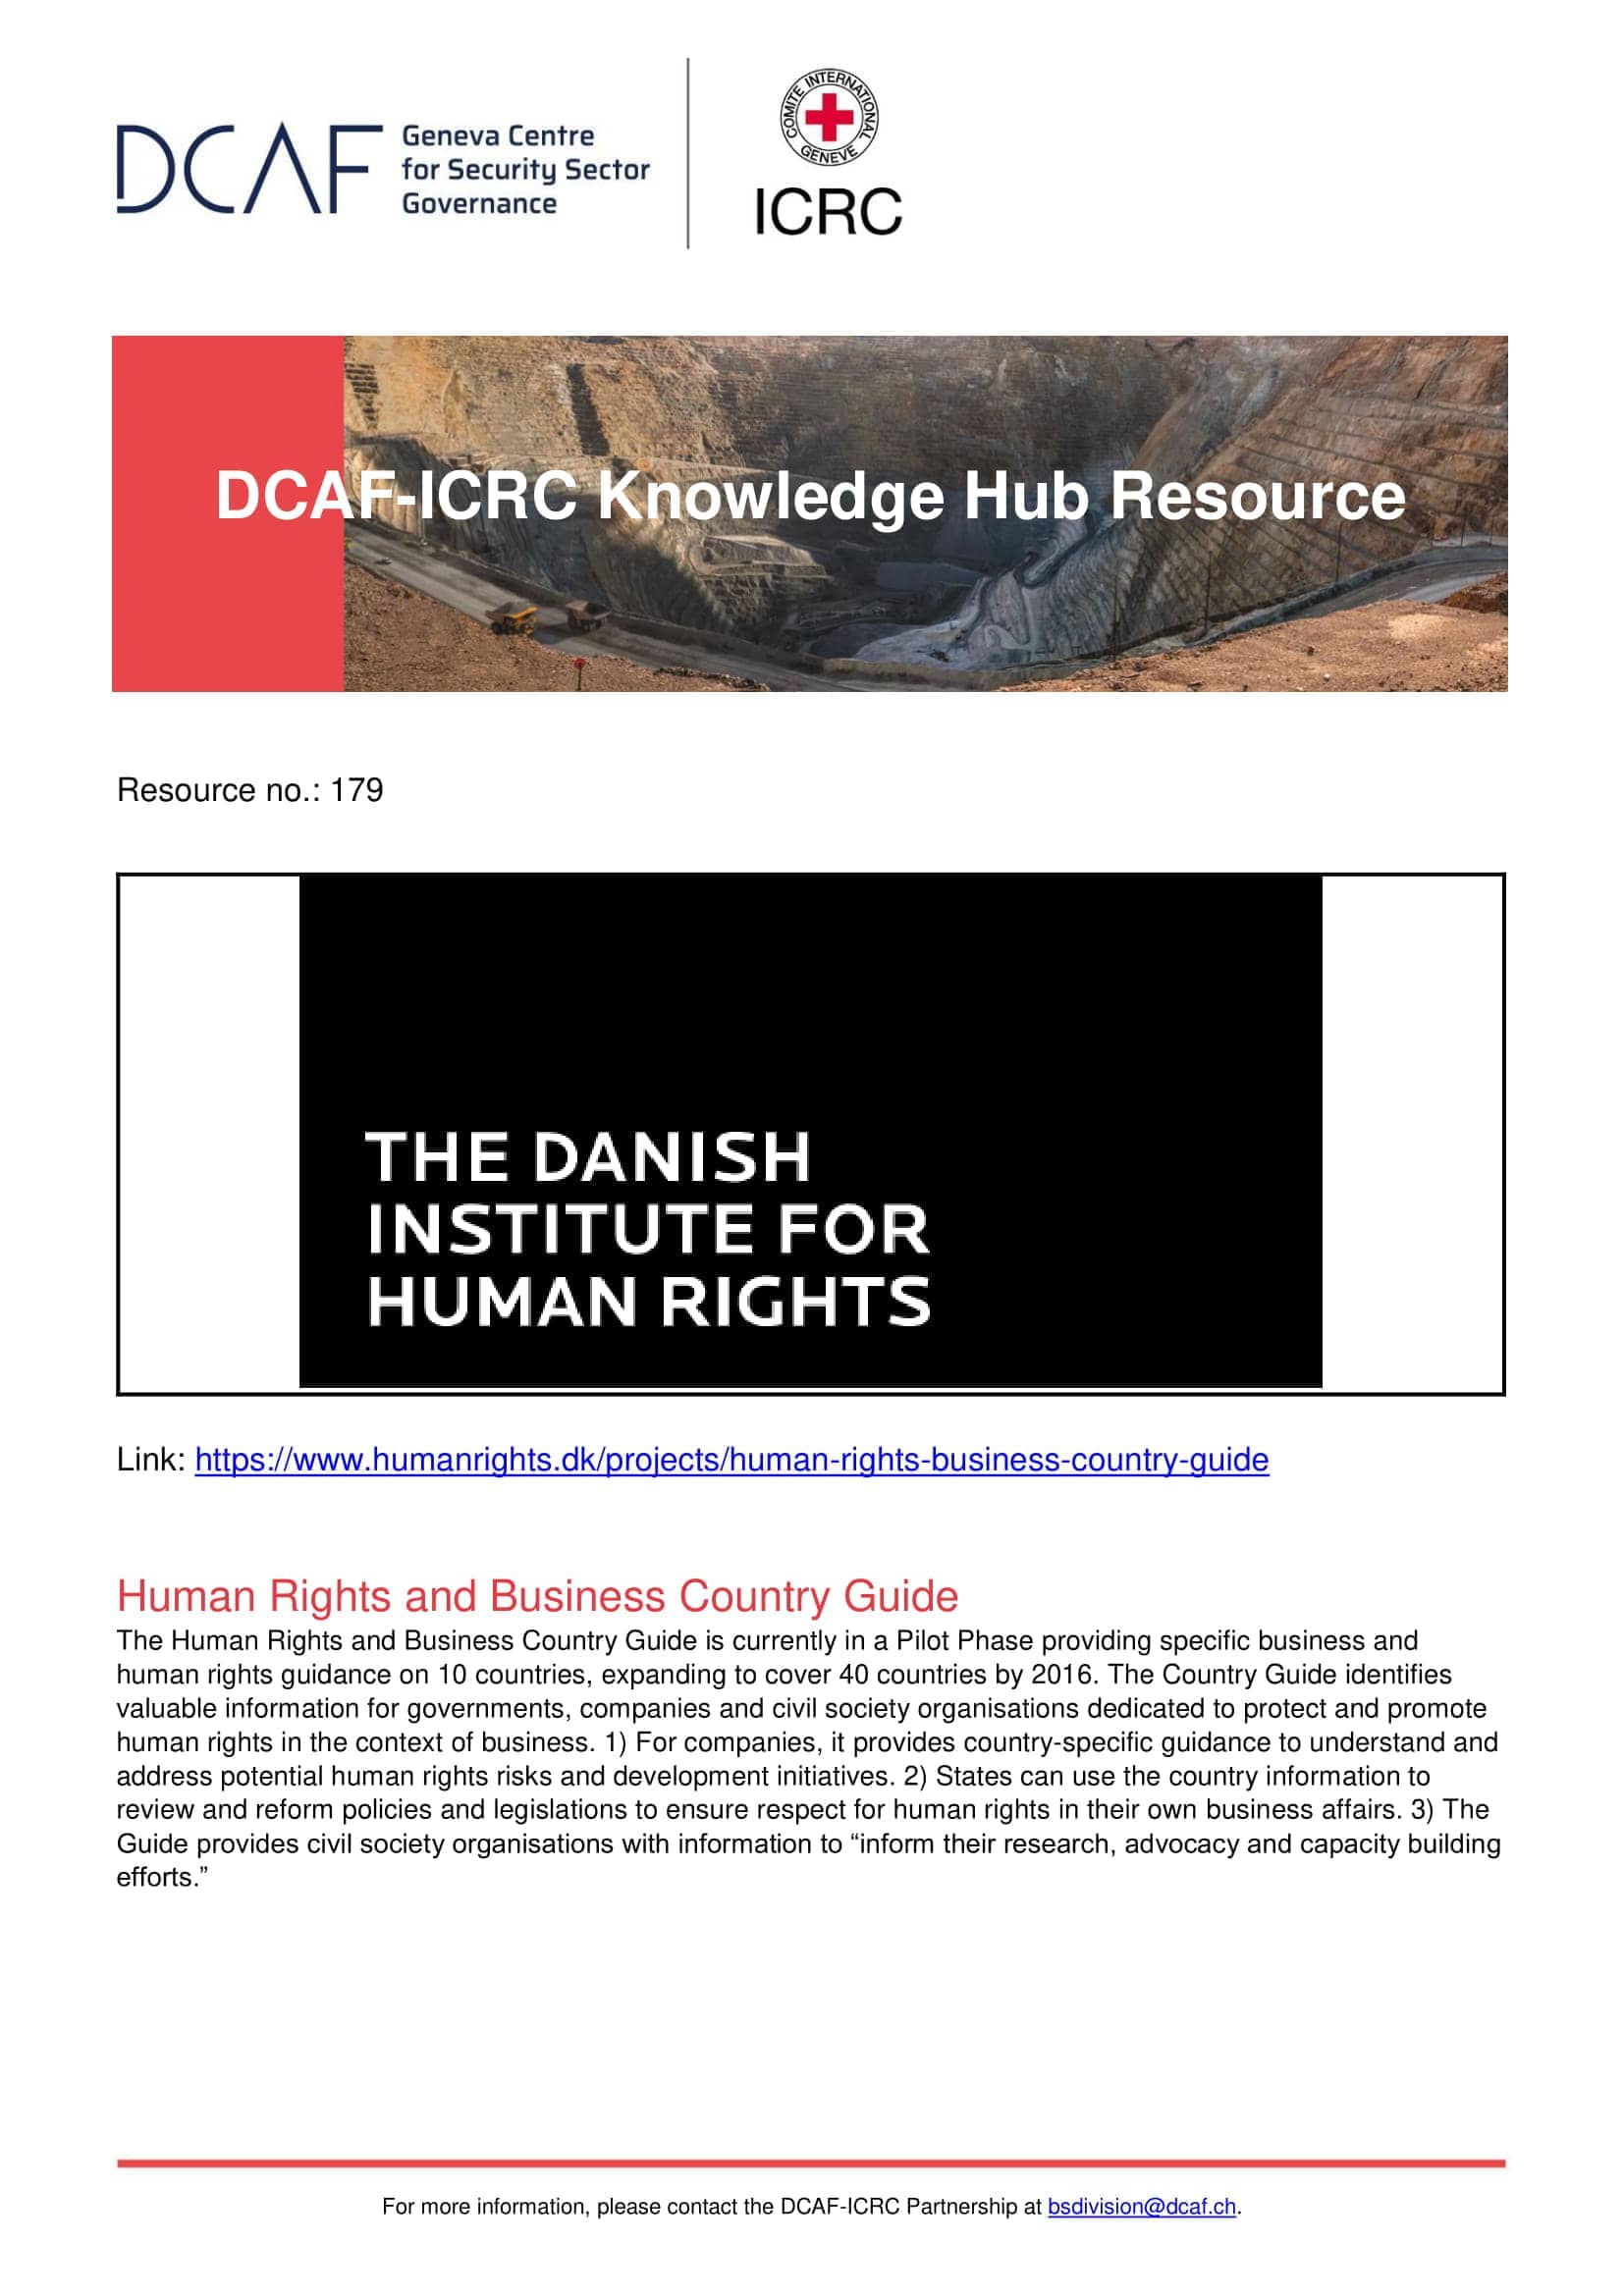 Human Rights and Business Country Guide (DCAF and ICRC)